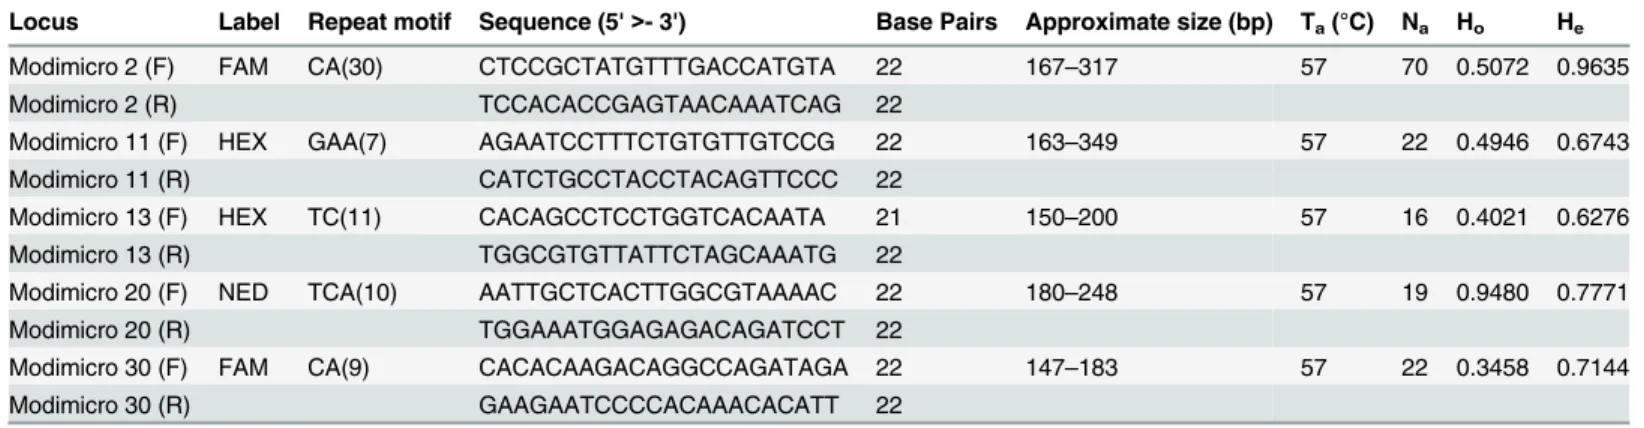 Table 2 shows the results of the 5 microsatellite loci characterised. The number of alleles ranged from 16 for Modimicro 13 to 70 for Modimicro 2